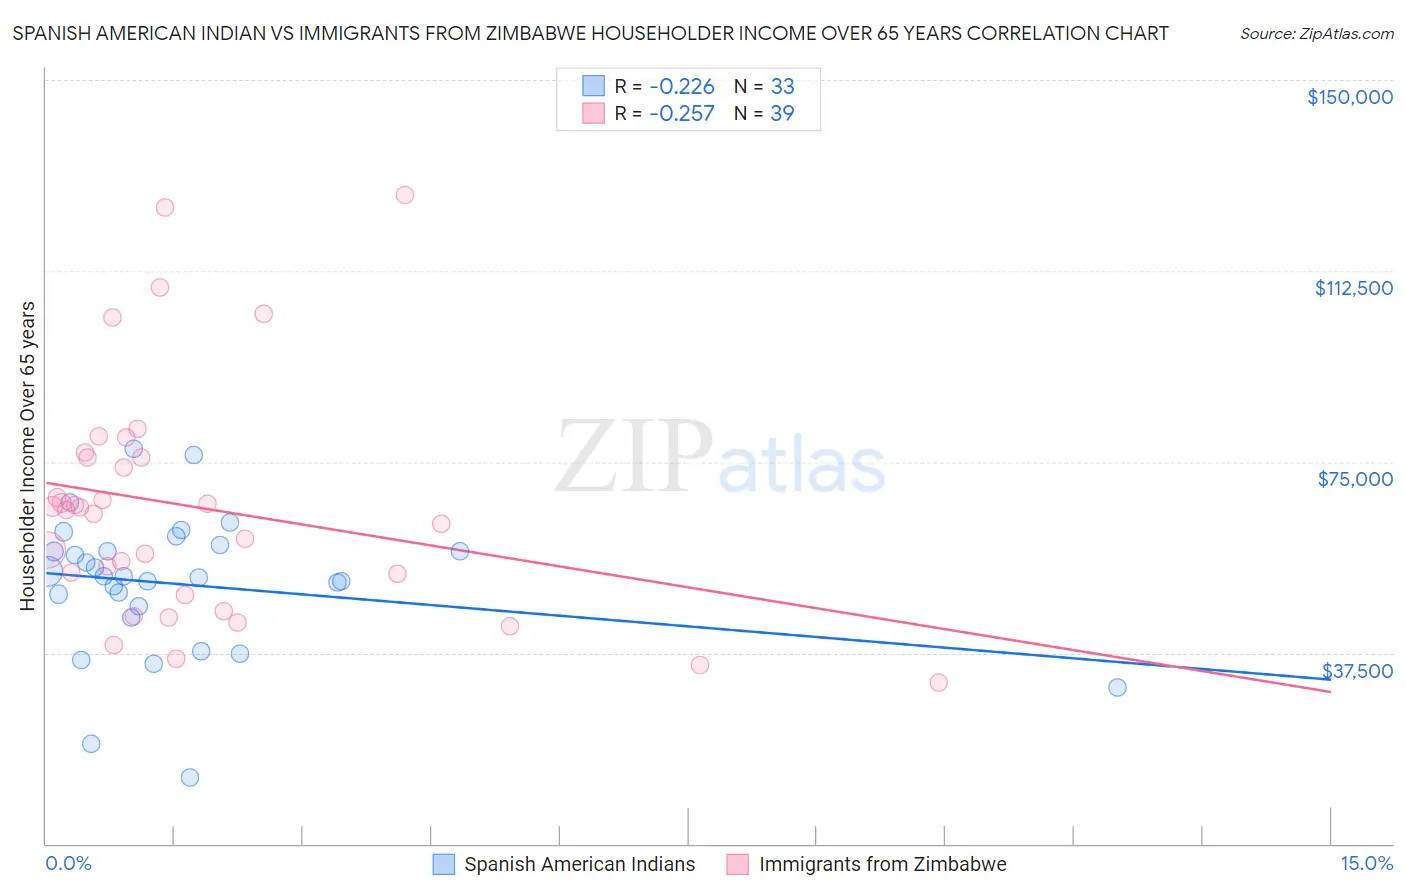 Spanish American Indian vs Immigrants from Zimbabwe Householder Income Over 65 years